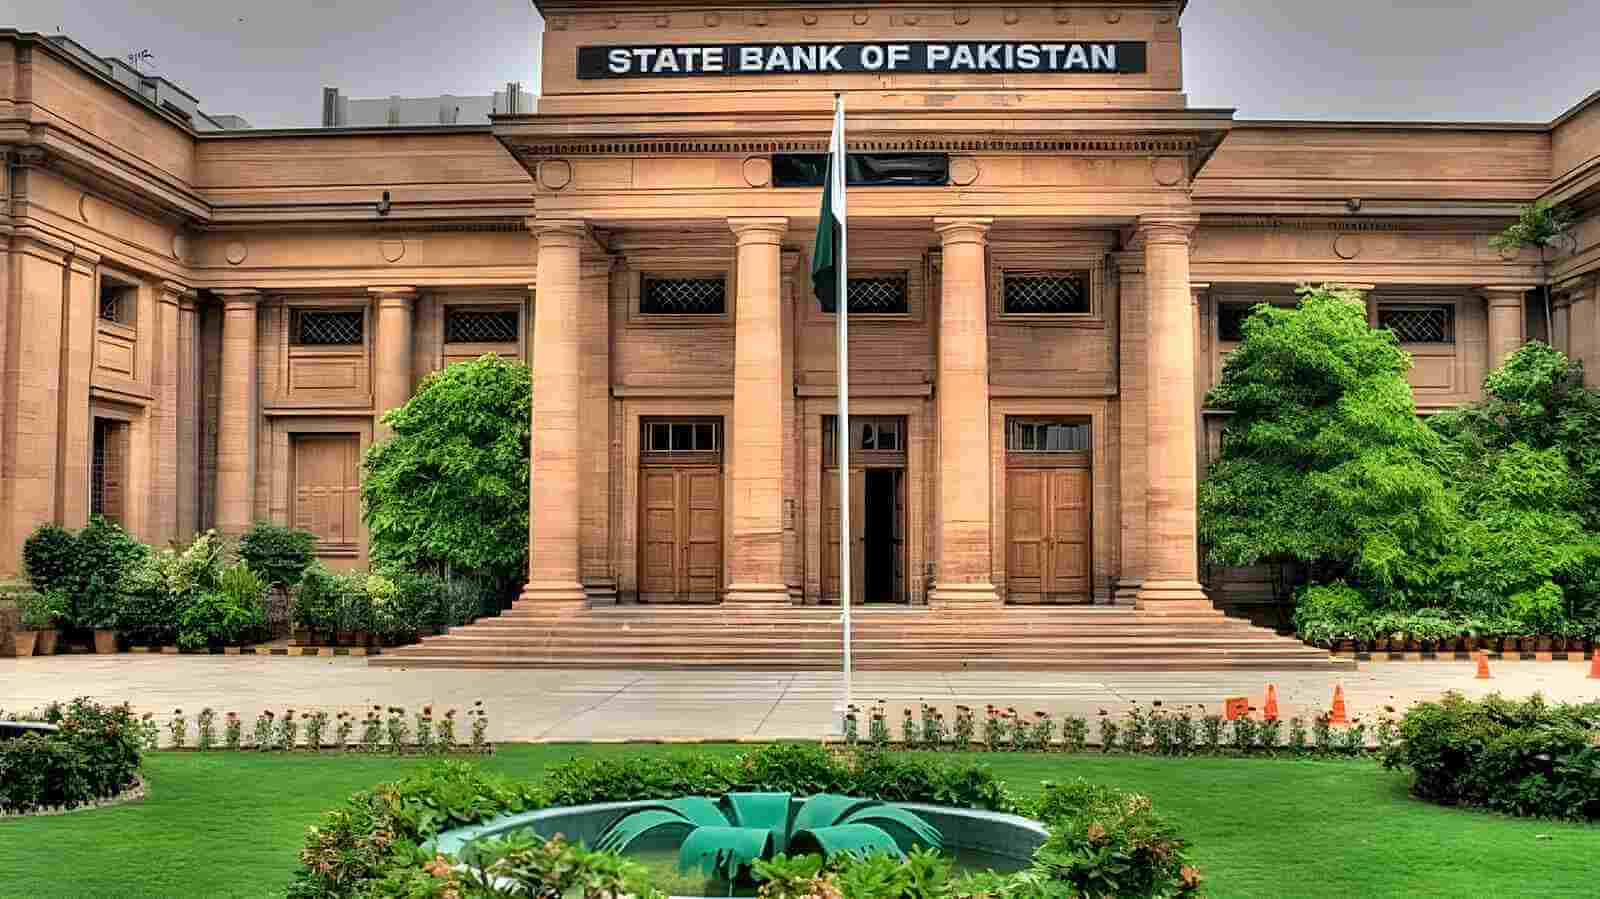 What Is the Electronic Credit Information Bureau (eCIB) State Bank of Pakistan